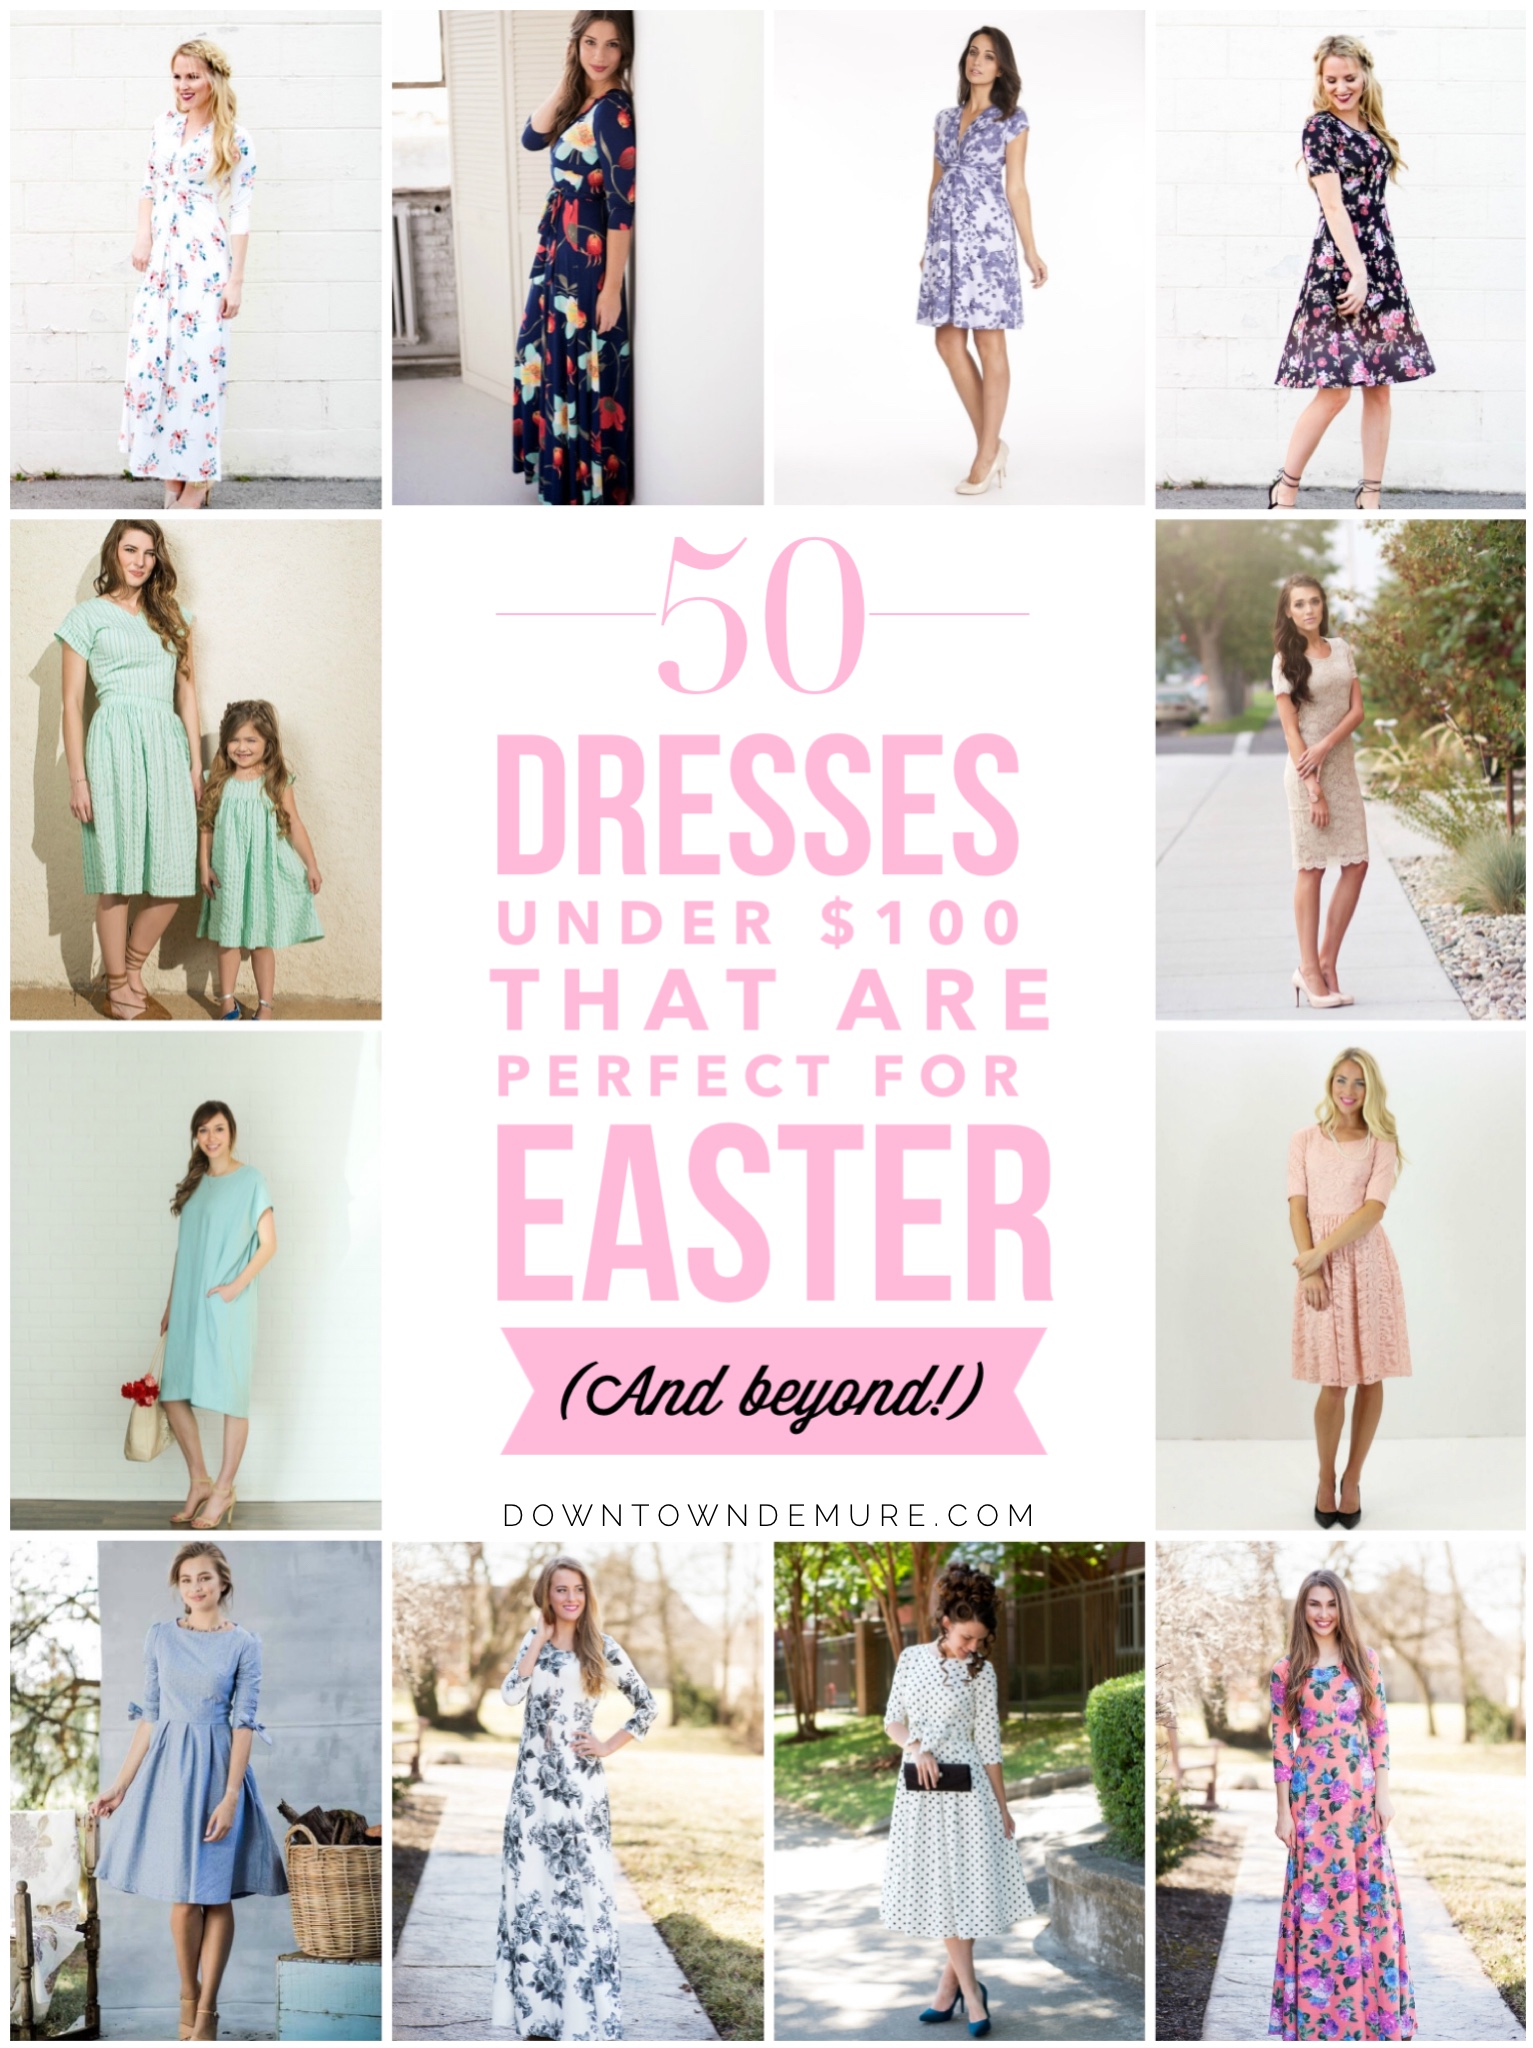 50 Dresses Under $100 That Are PERFECT for Easter (And Beyond!) - Downtown Demure